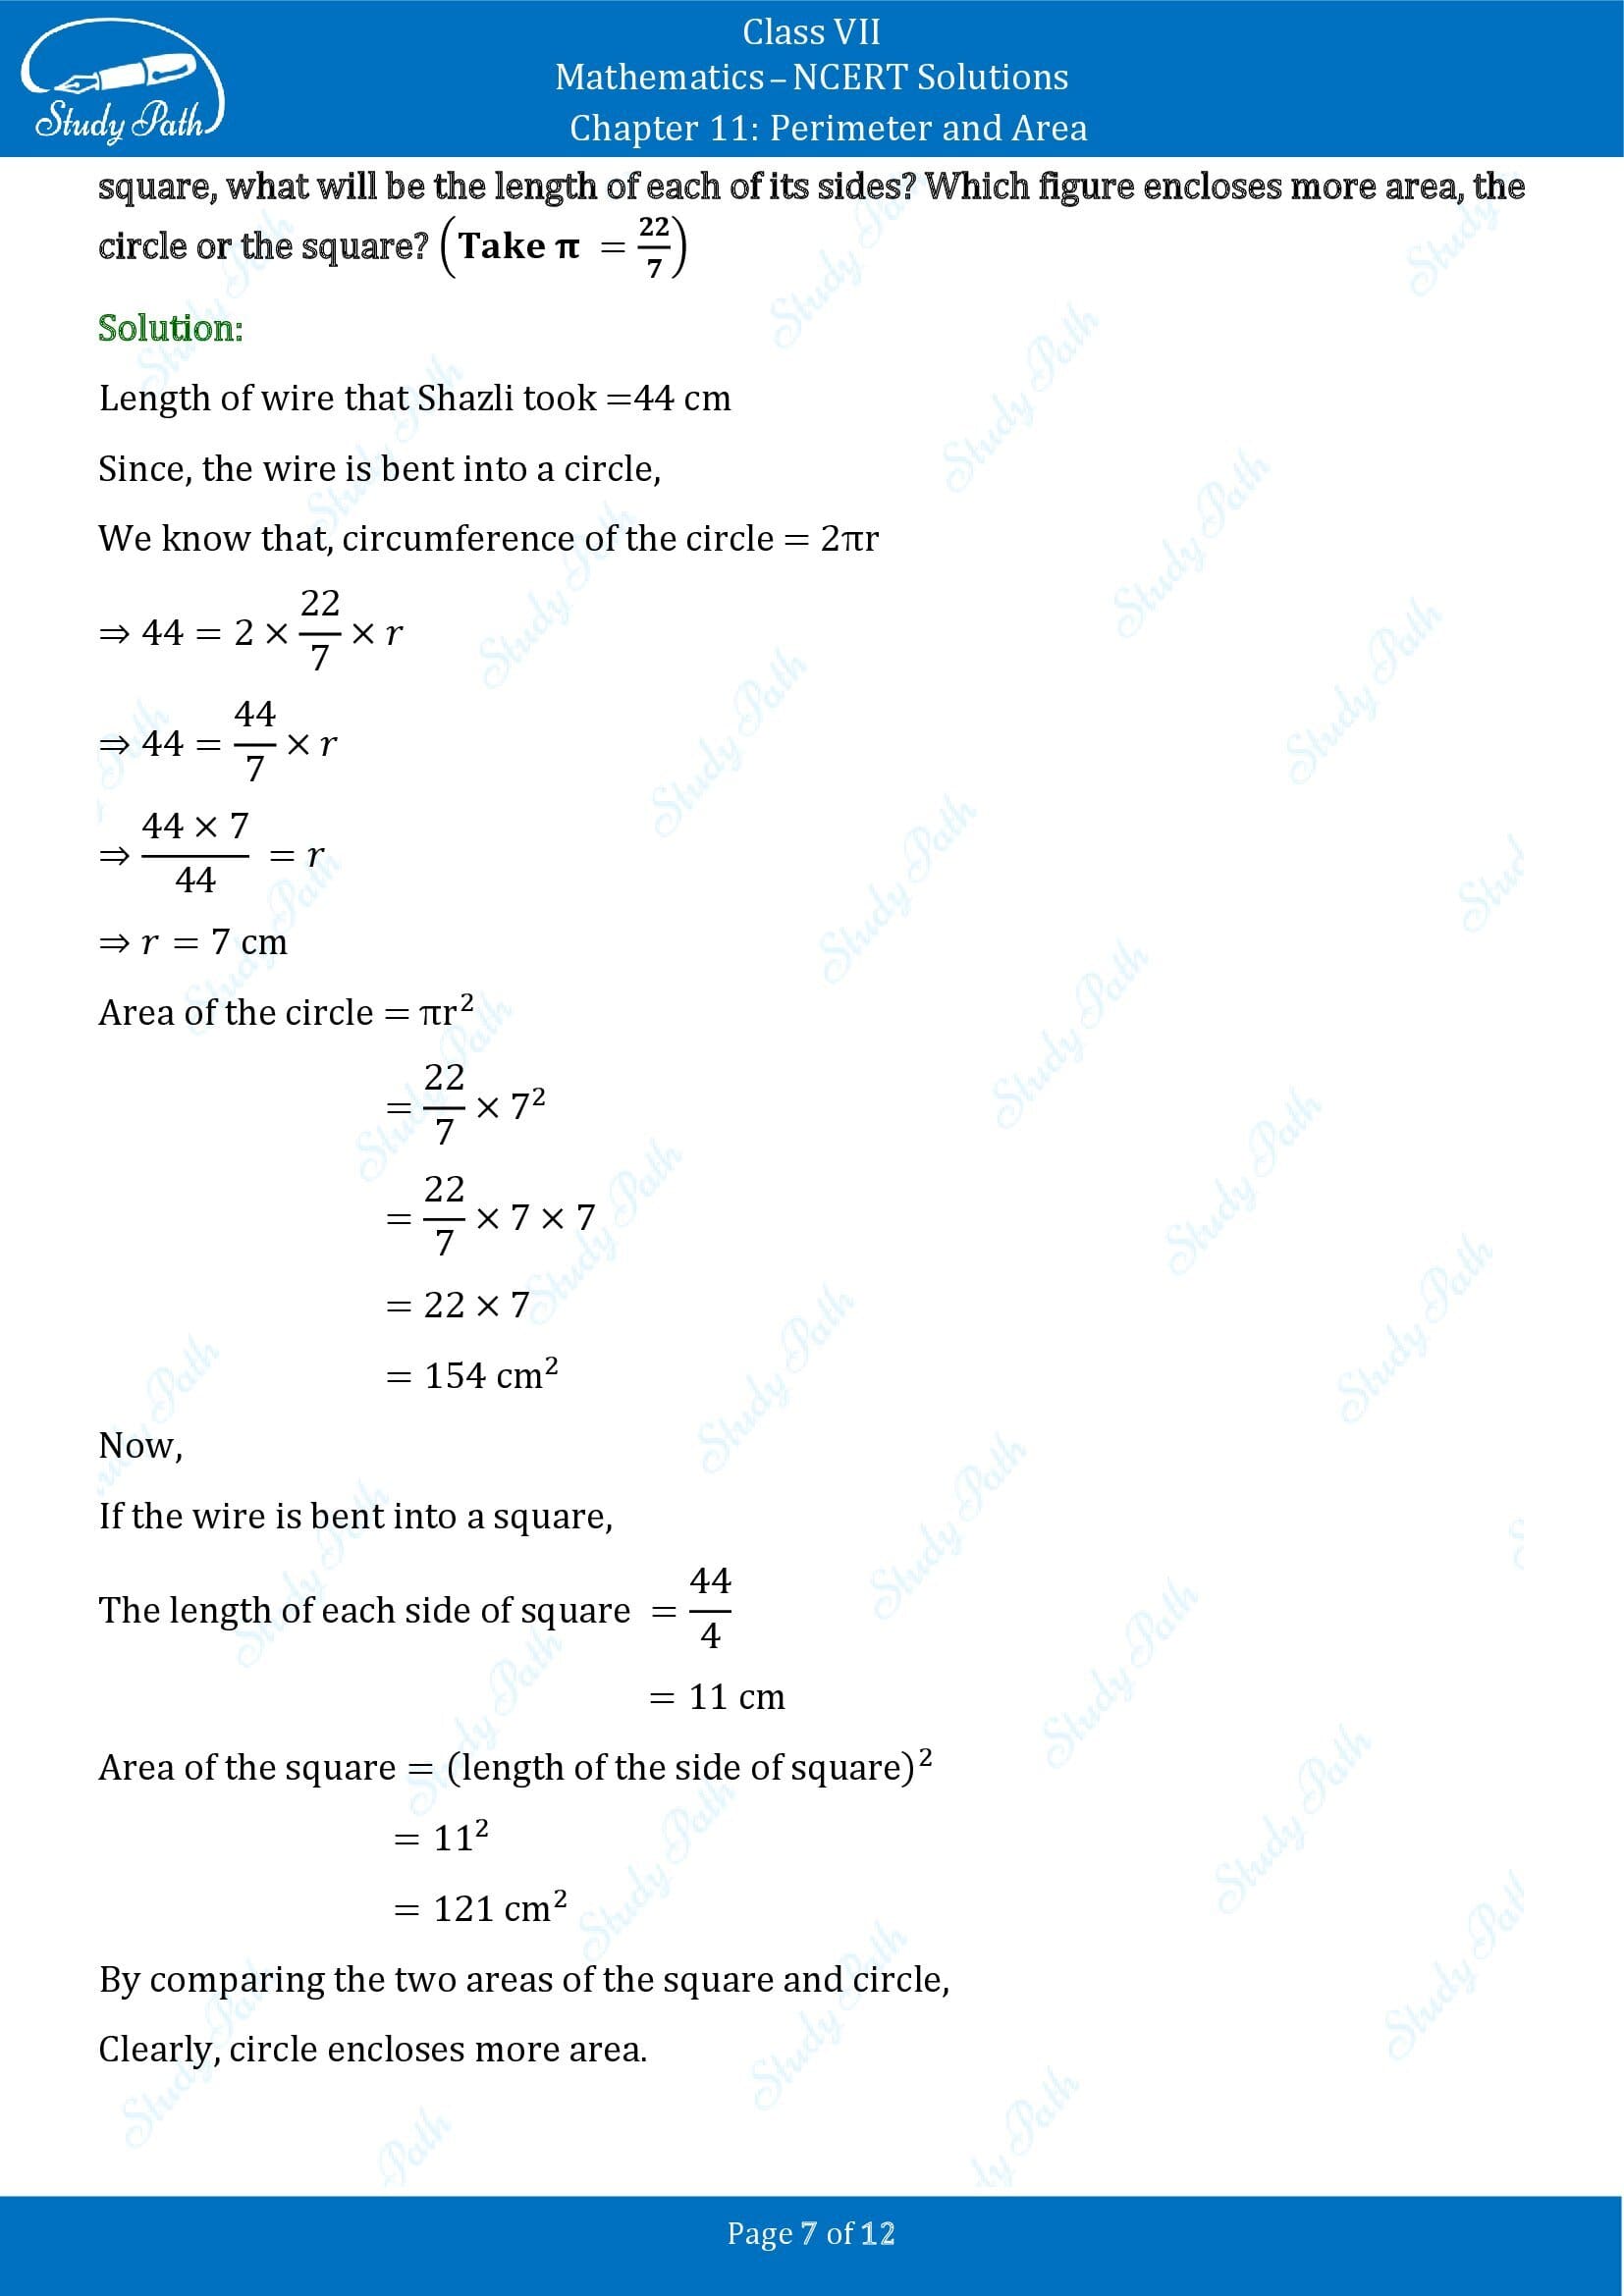 NCERT Solutions for Class 7 Maths Chapter 11 Perimeter and Area Exercise 11.3 00007